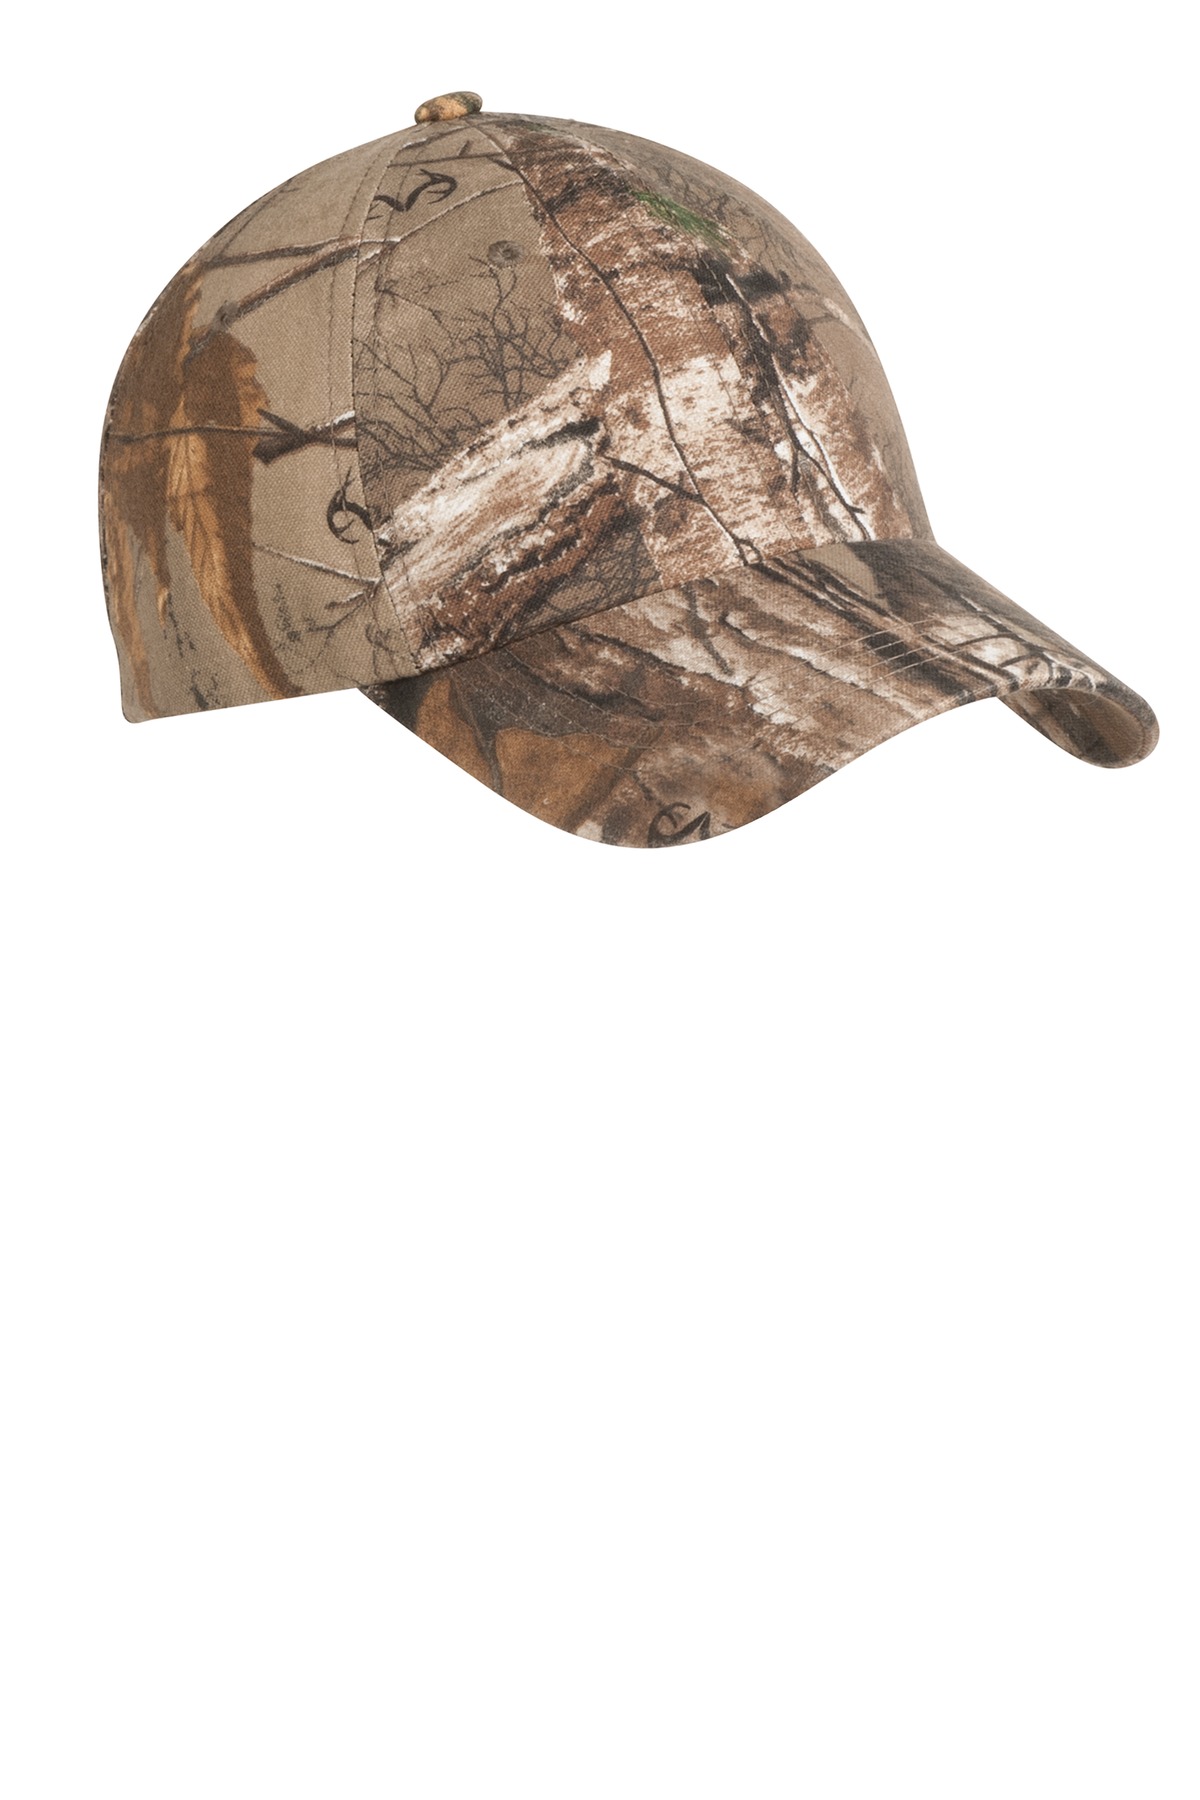 Selected Color is Realtree Xtra